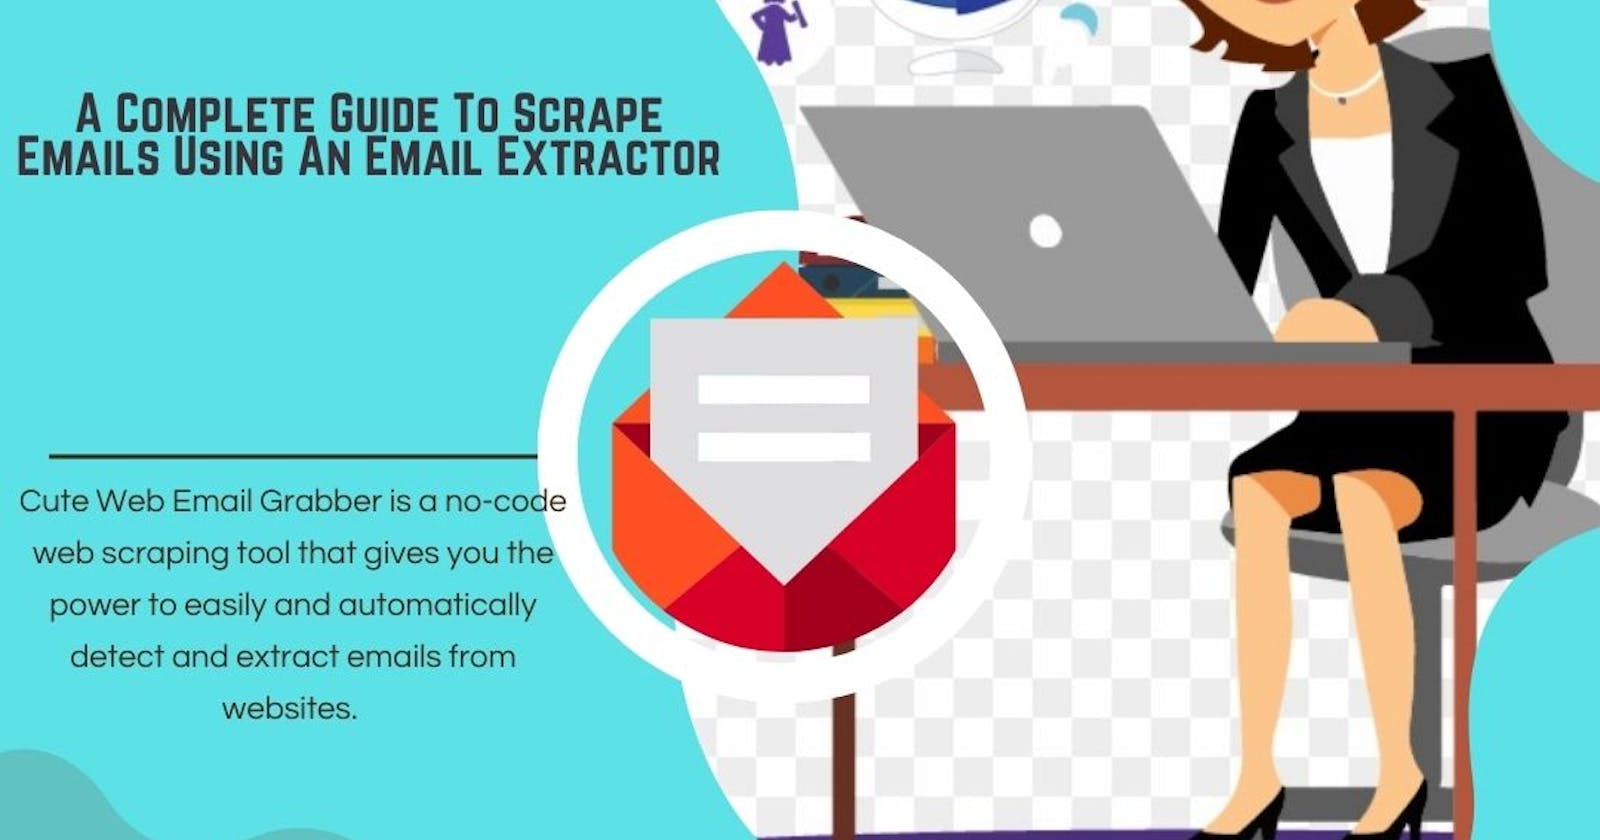 How To Scrape Emails With An Email Extractor?